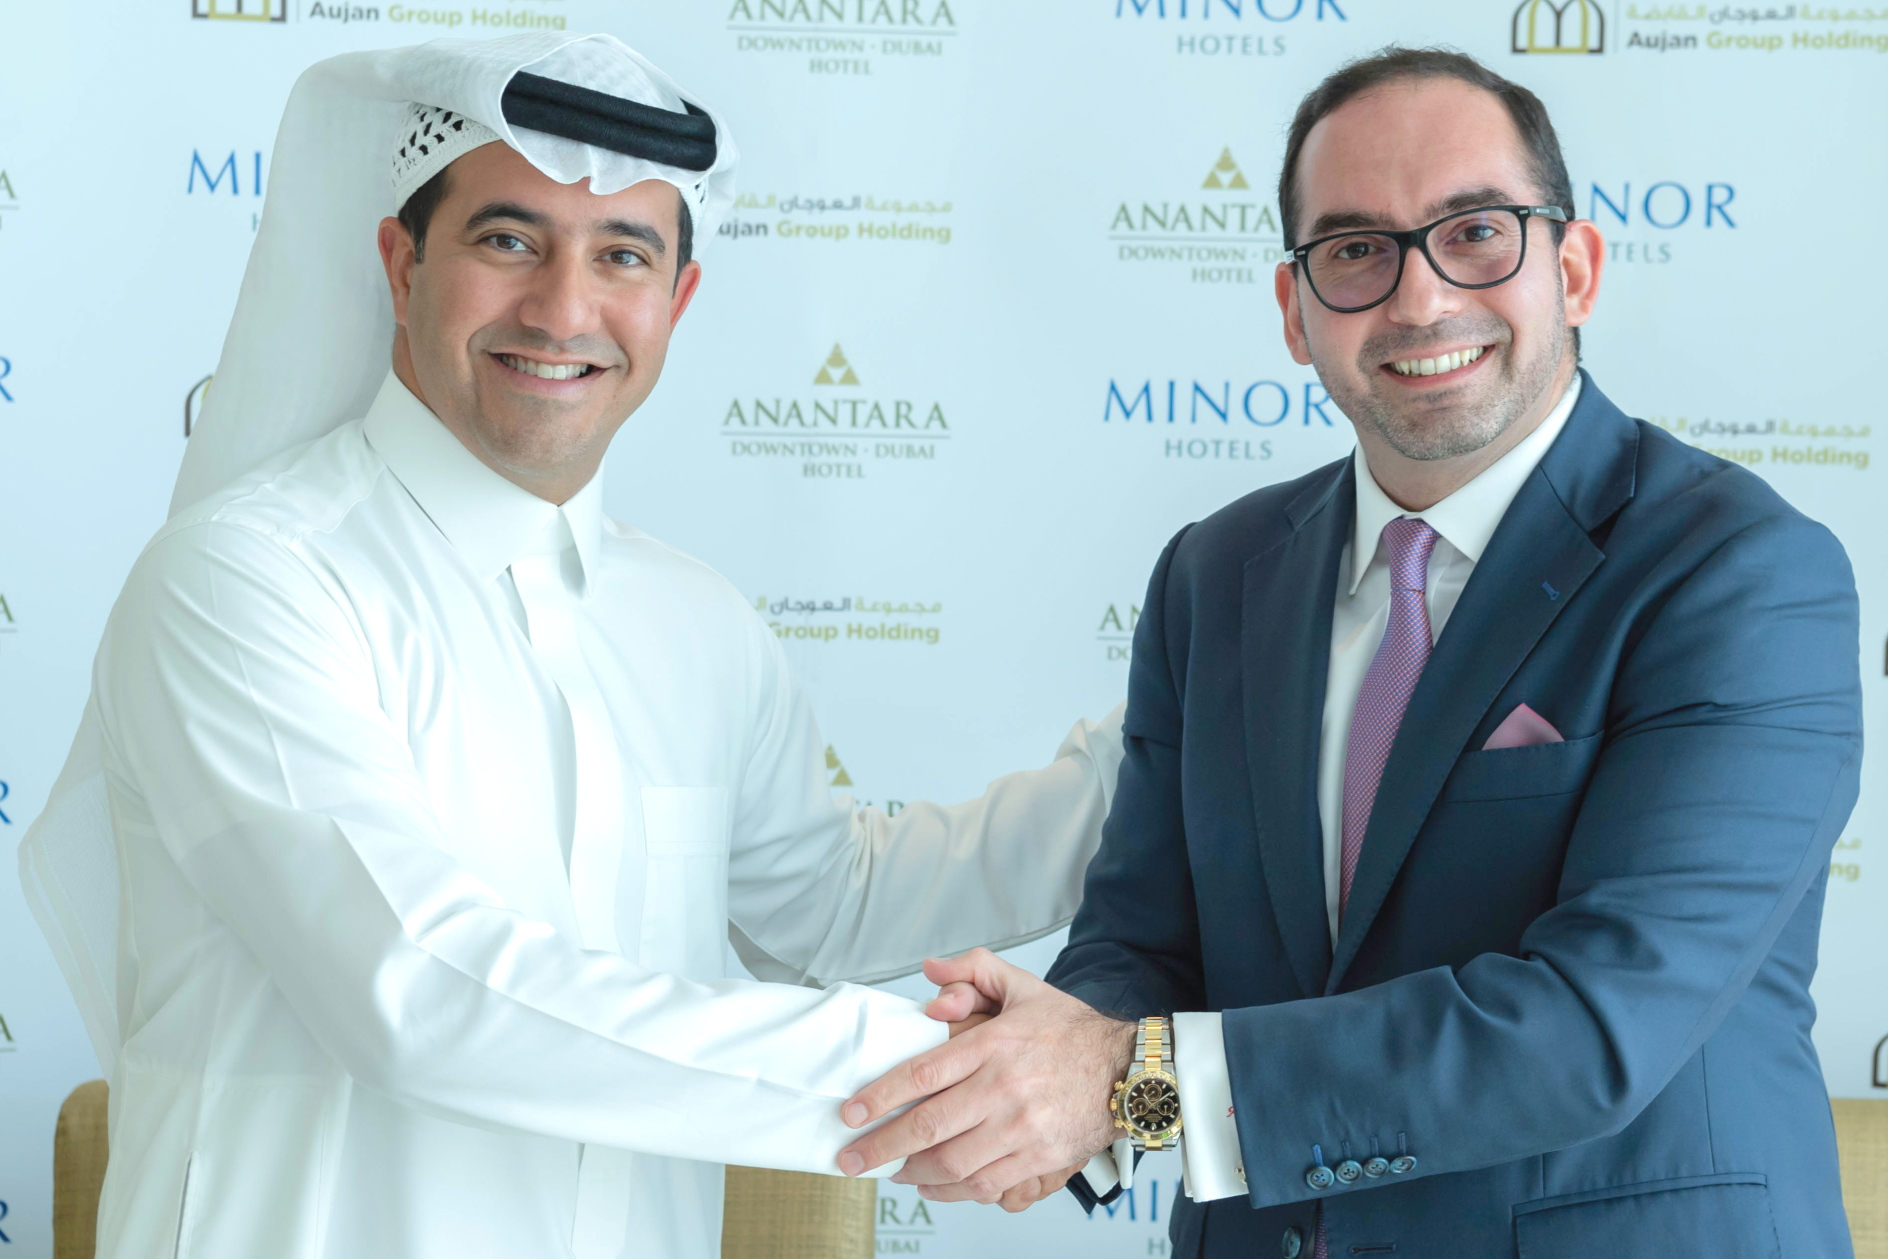 Abdulla Aujan - Executive Chairman, Aujan Group Holding with Amir Golbarg - Senior Vice President Middle East and Africa, Minor Hotels. Click to enlarge.